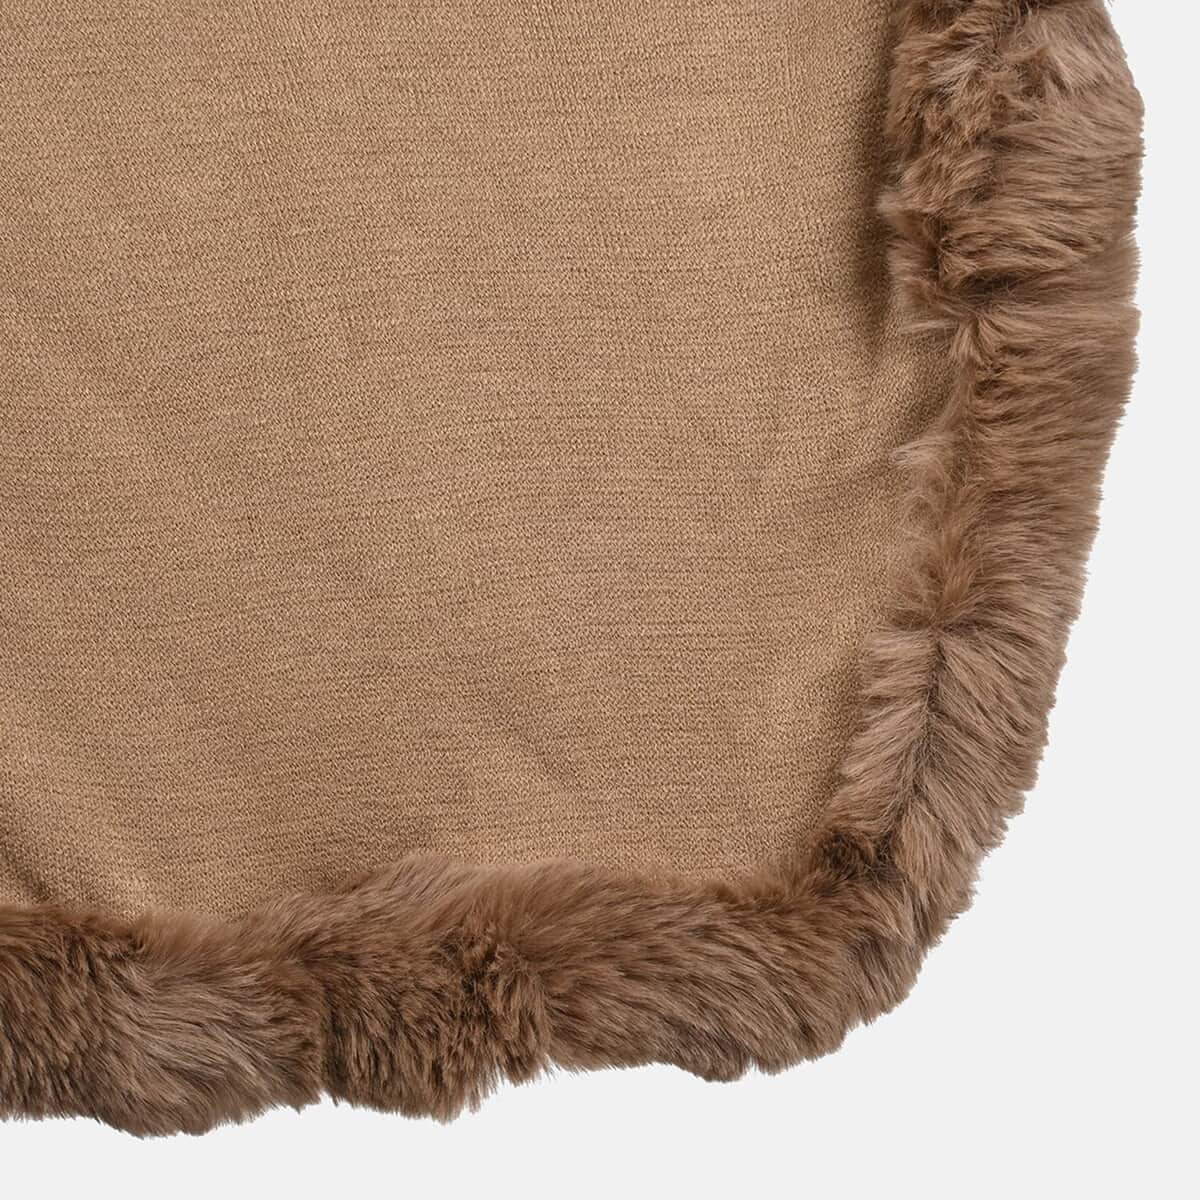 Designer Inspired Beige Ruana with Faux Fur Trim - One Size Fits Most image number 4